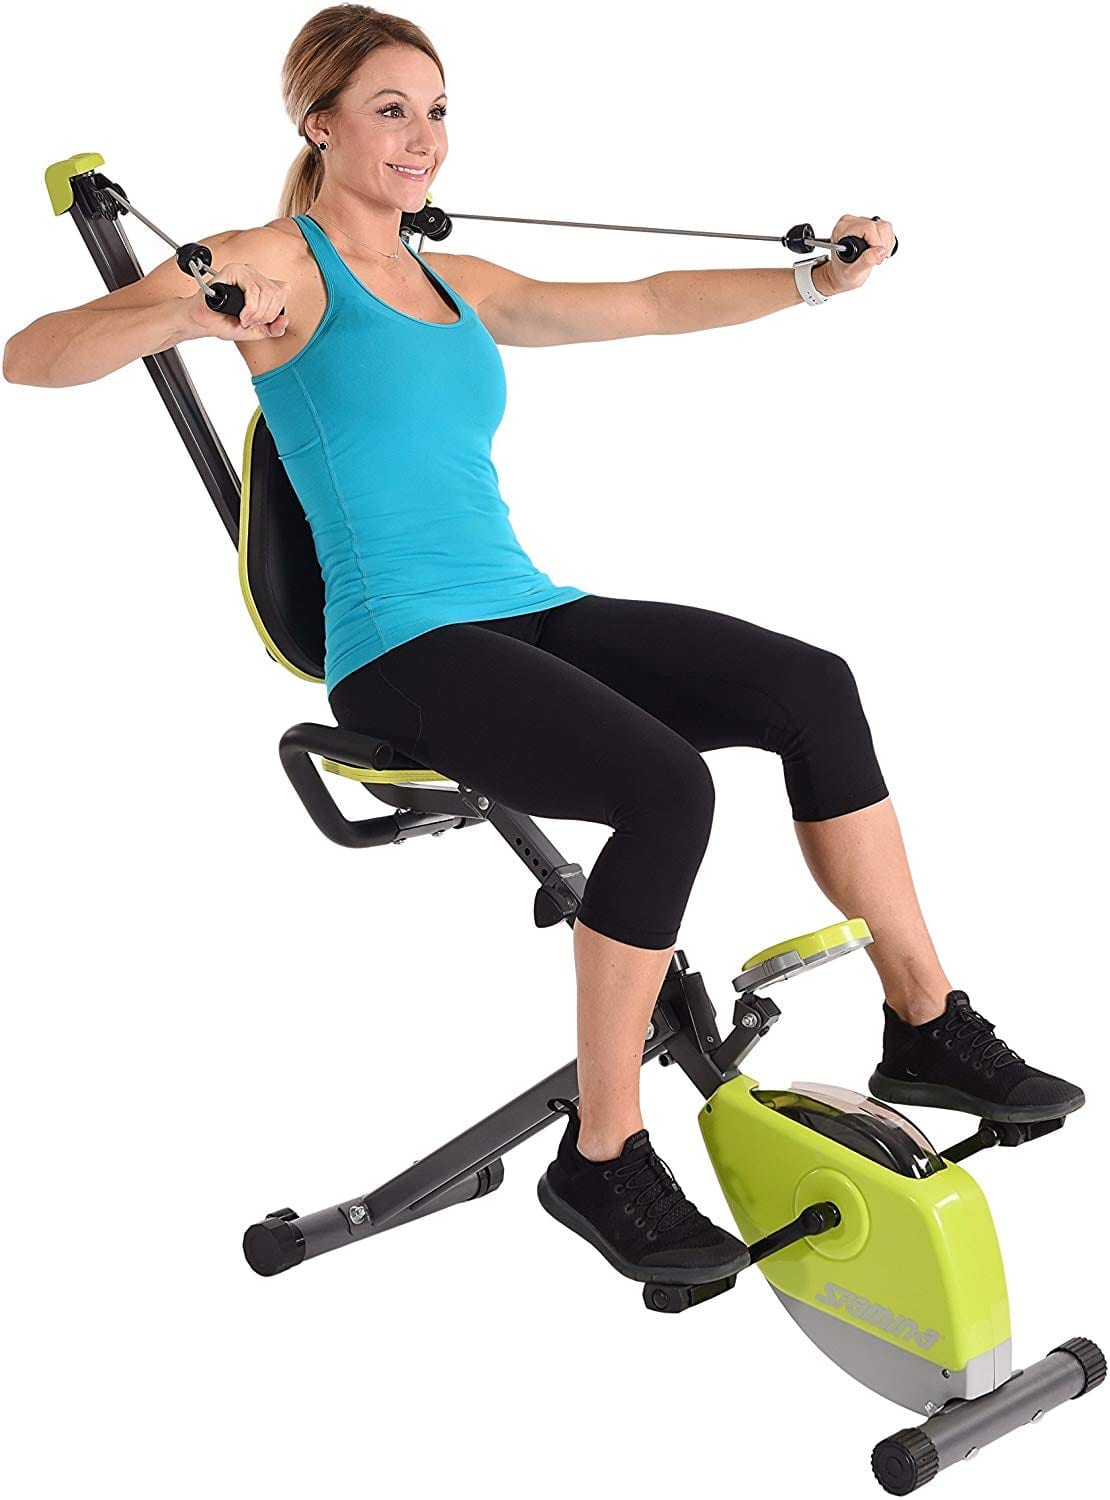 15 Minute Exercise Bike With Upper Body Workout for Build Muscle